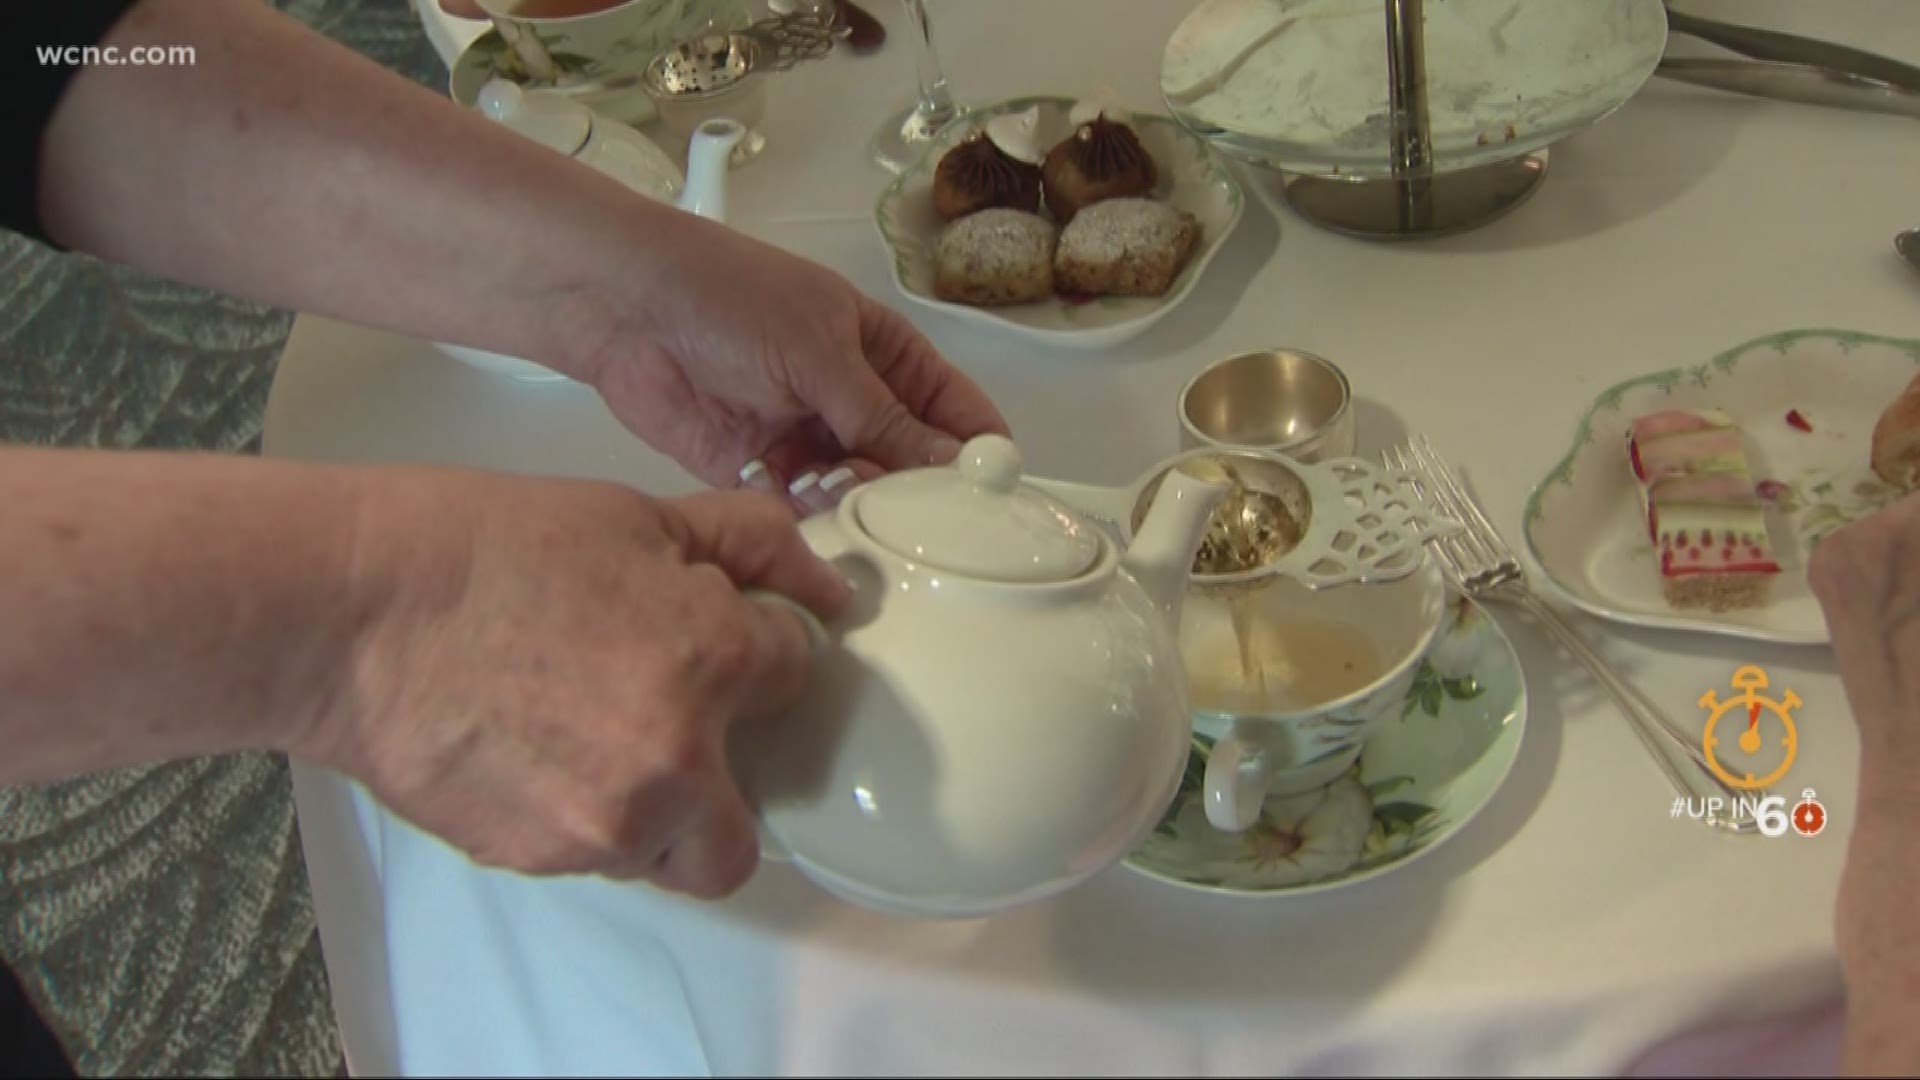 Charlotteans don't have to travel across the pond for tea time. The Ballantyne Hotel hosts afternoon tea every week.